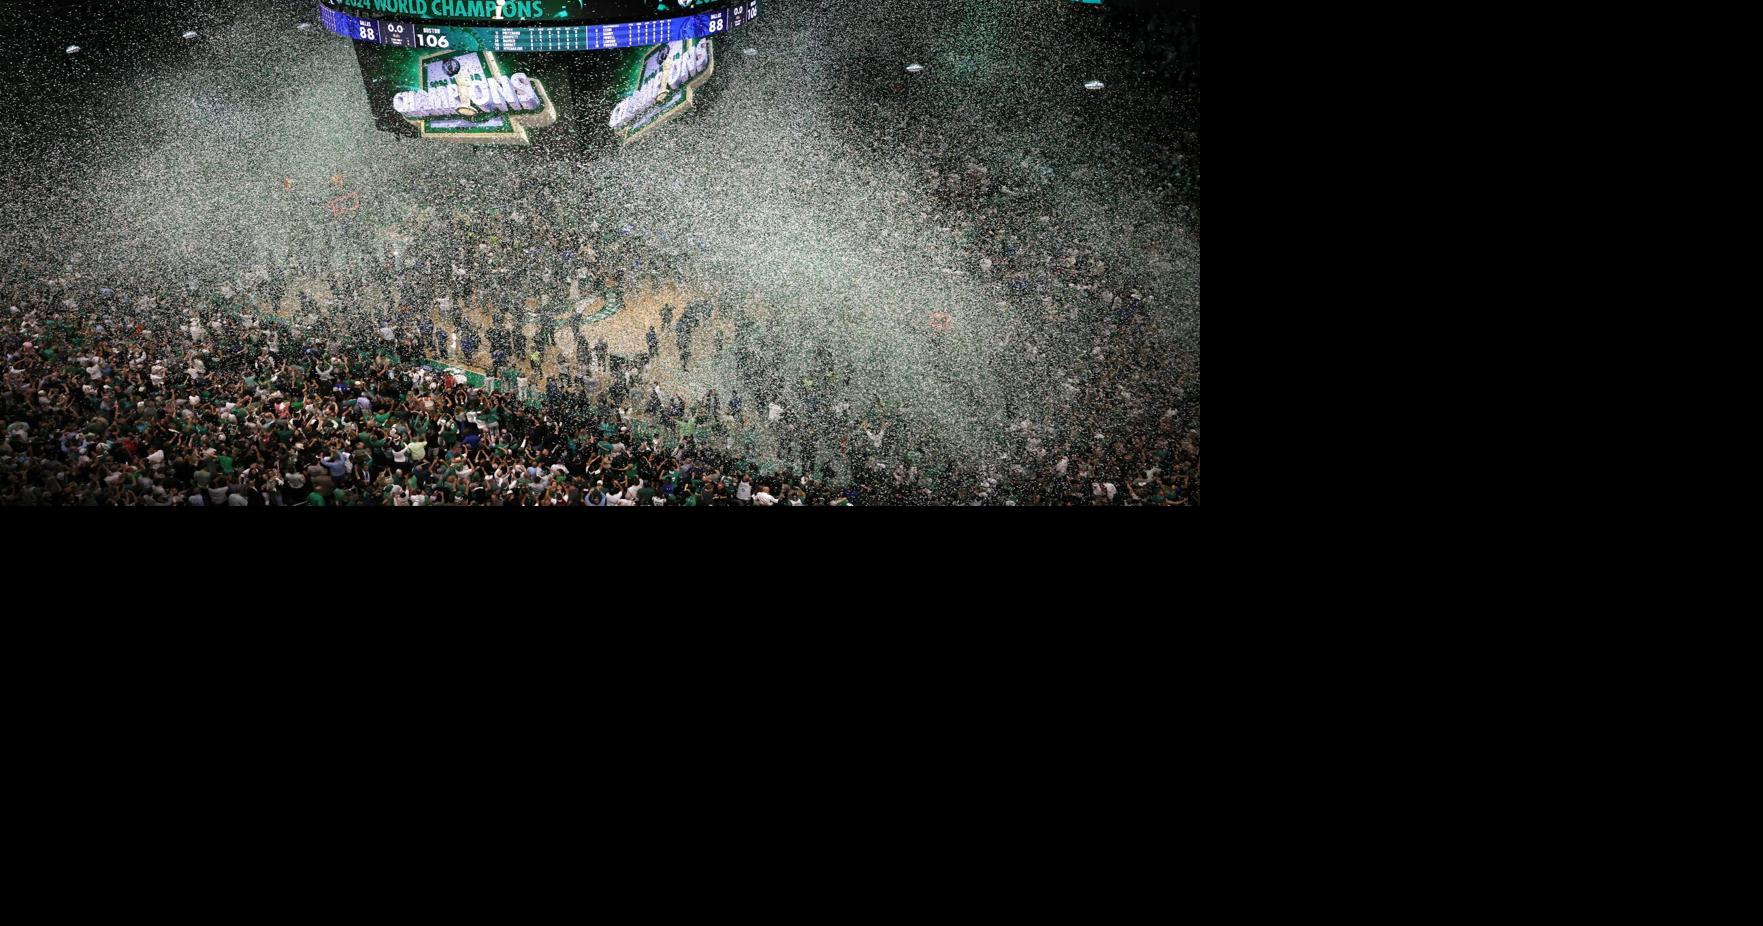 Chris Young: Reviewing the last pieces of Celtics championship confetti | Sports